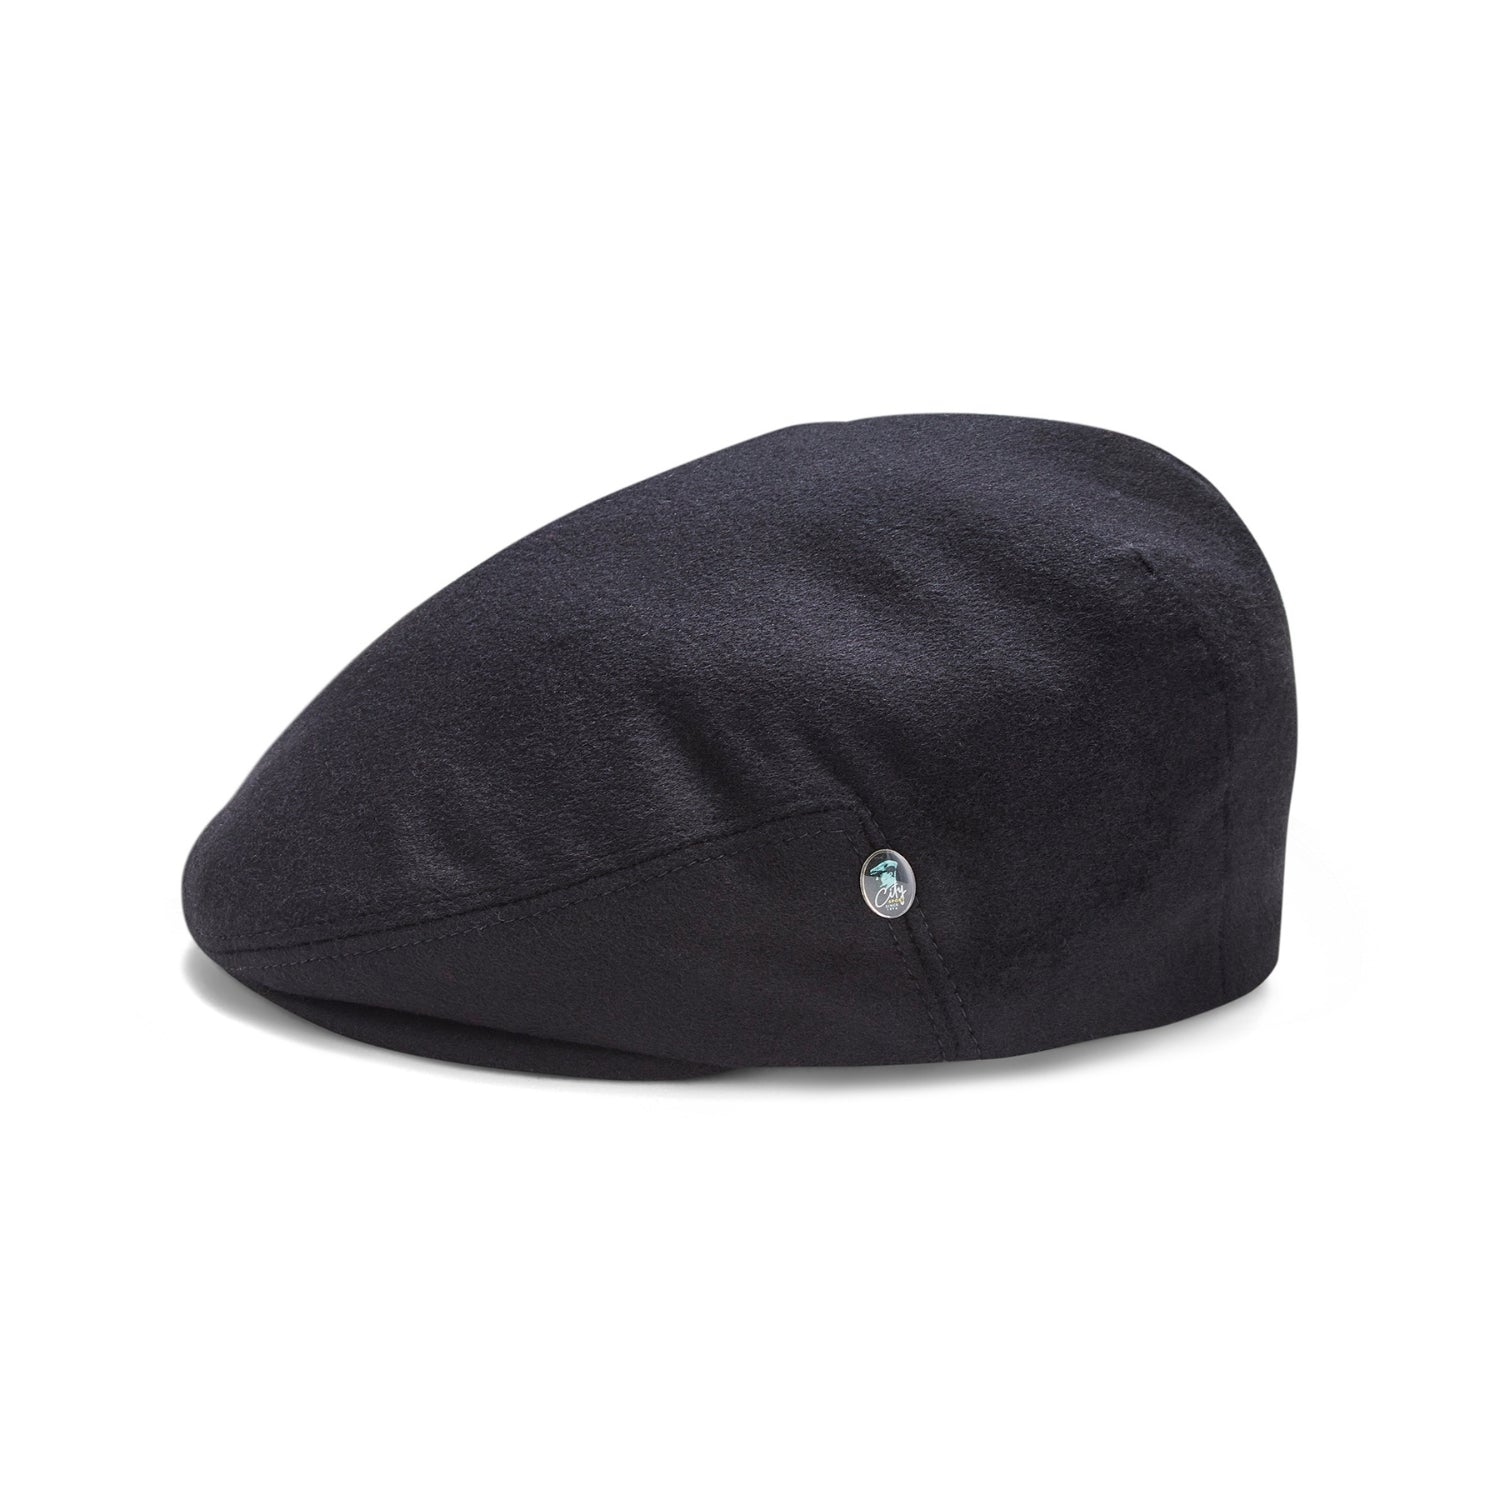 Black Cashmere Flat Cap by CitySport | Side View | The Cashmere Choice